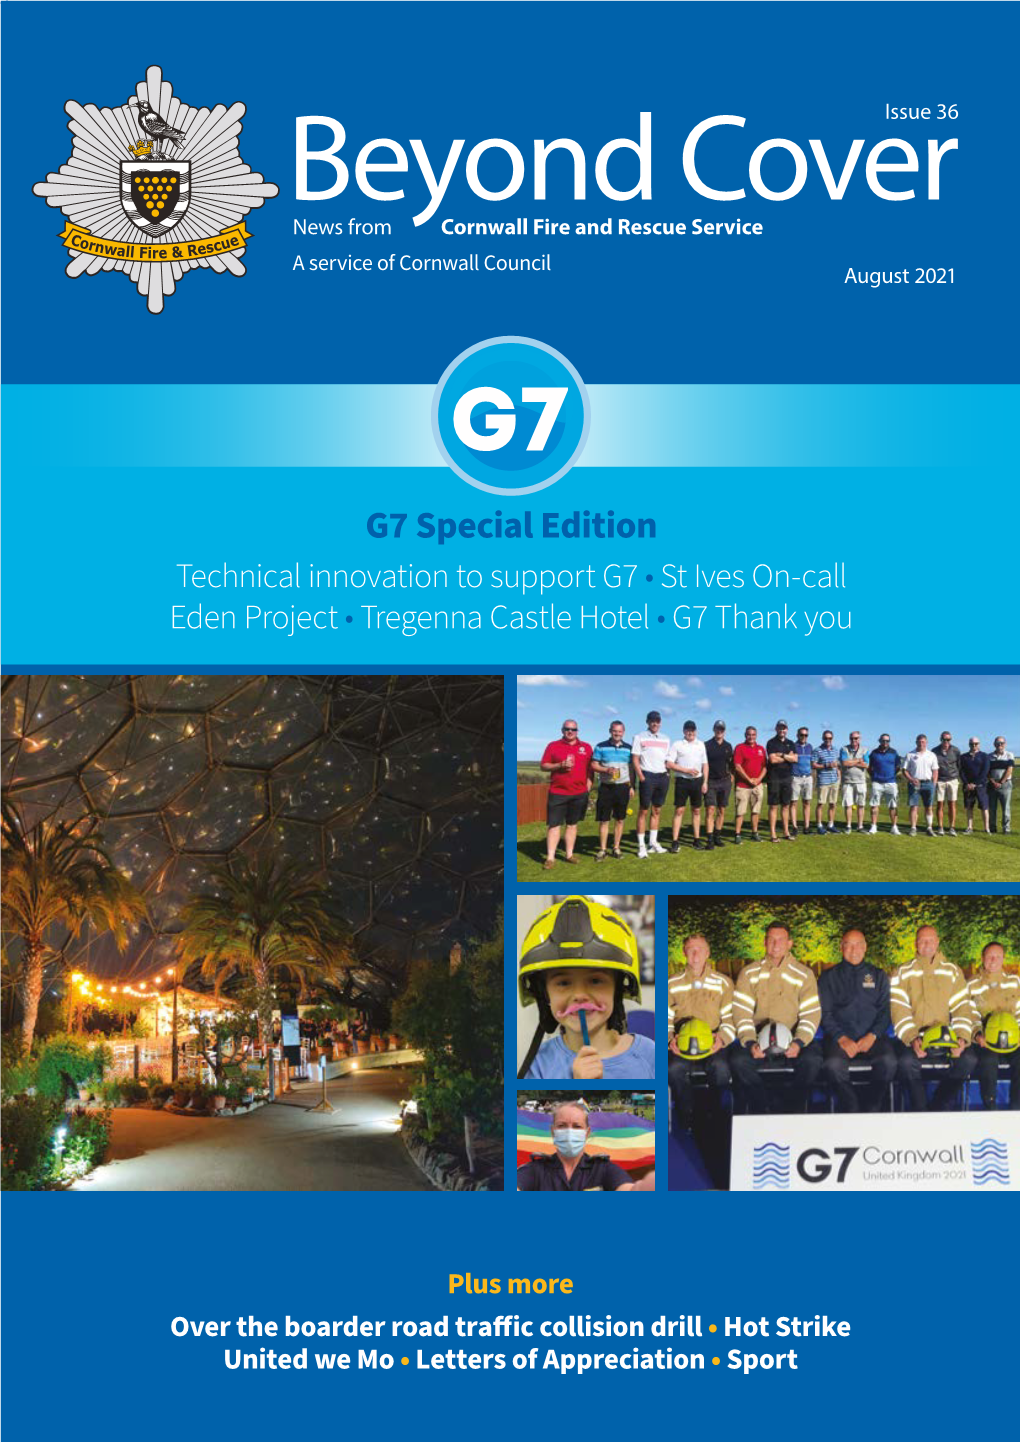 G7 Special Edition Technical Innovation to Support G7 • St Ives On-Call Eden Project • Tregenna Castle Hotel • G7 Thank You